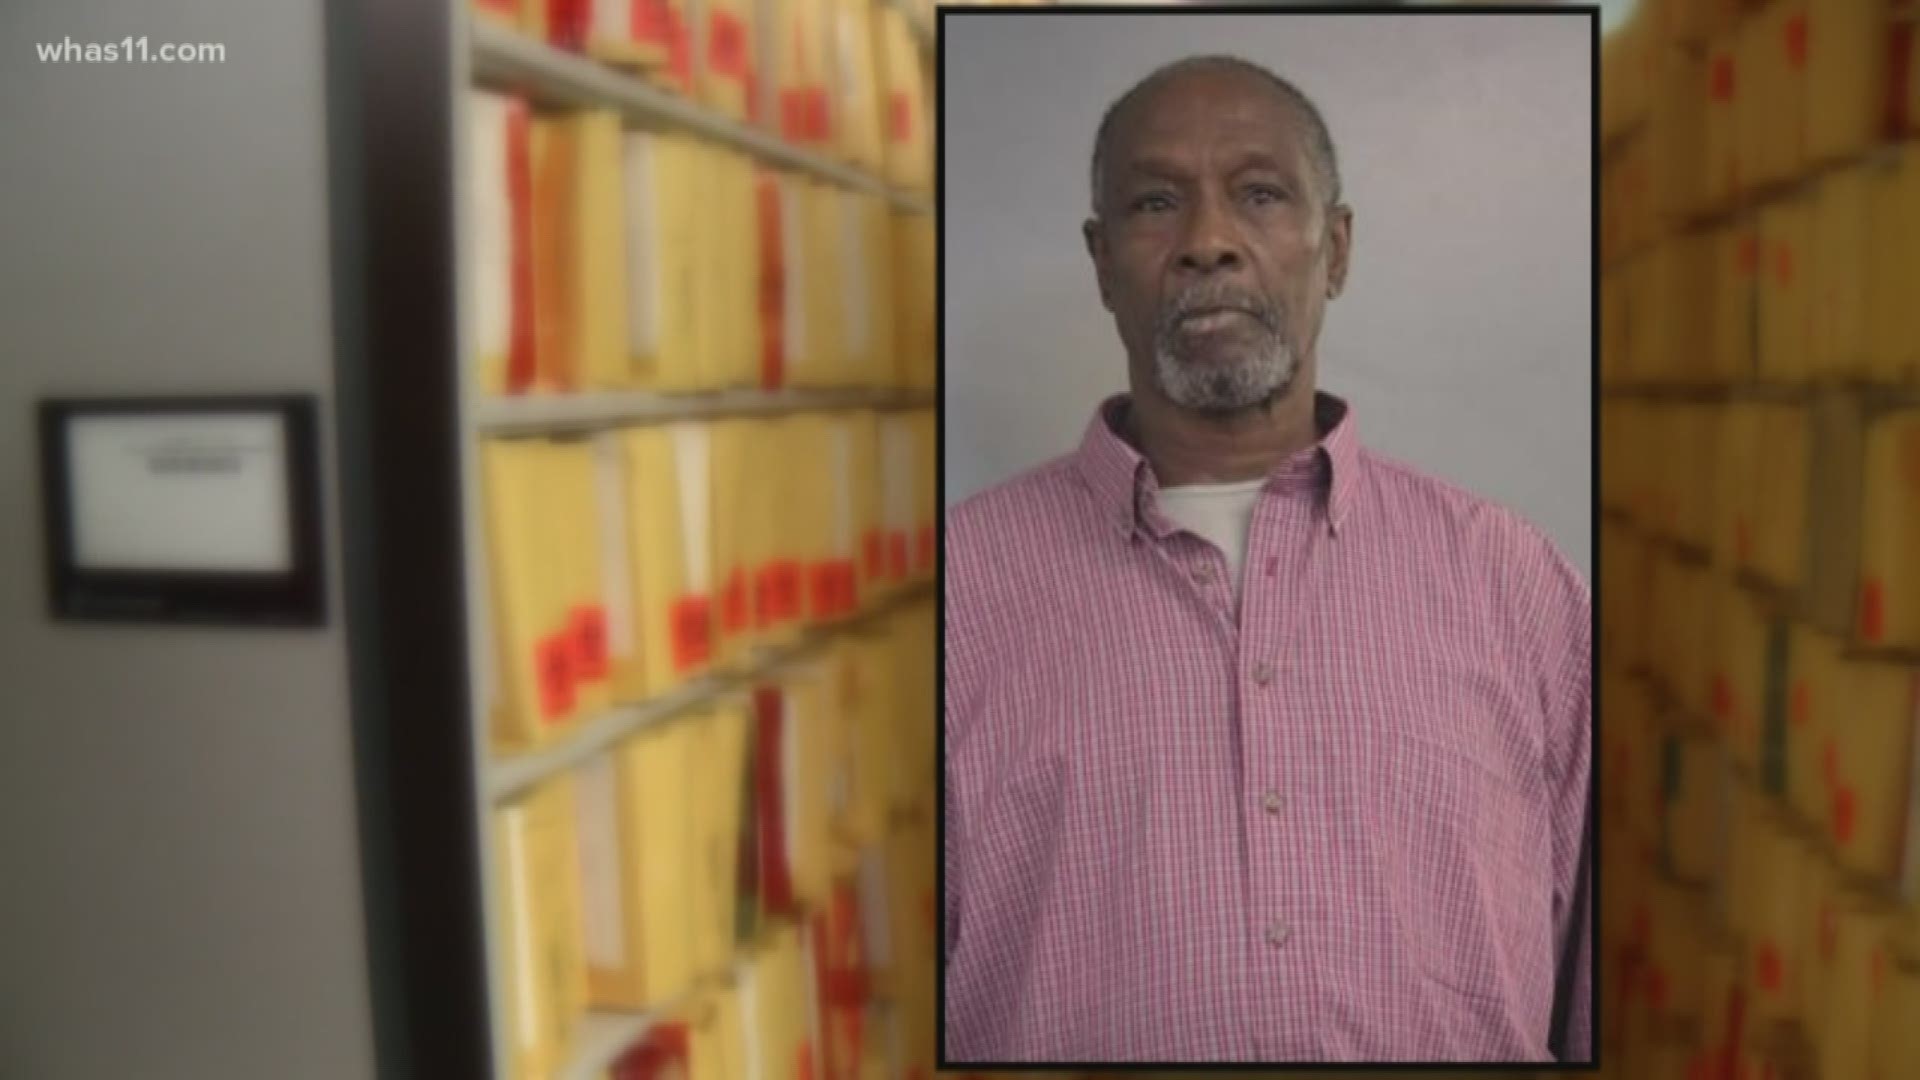 Roscoe Smith, 71, is facing charges in a 1990 rape.